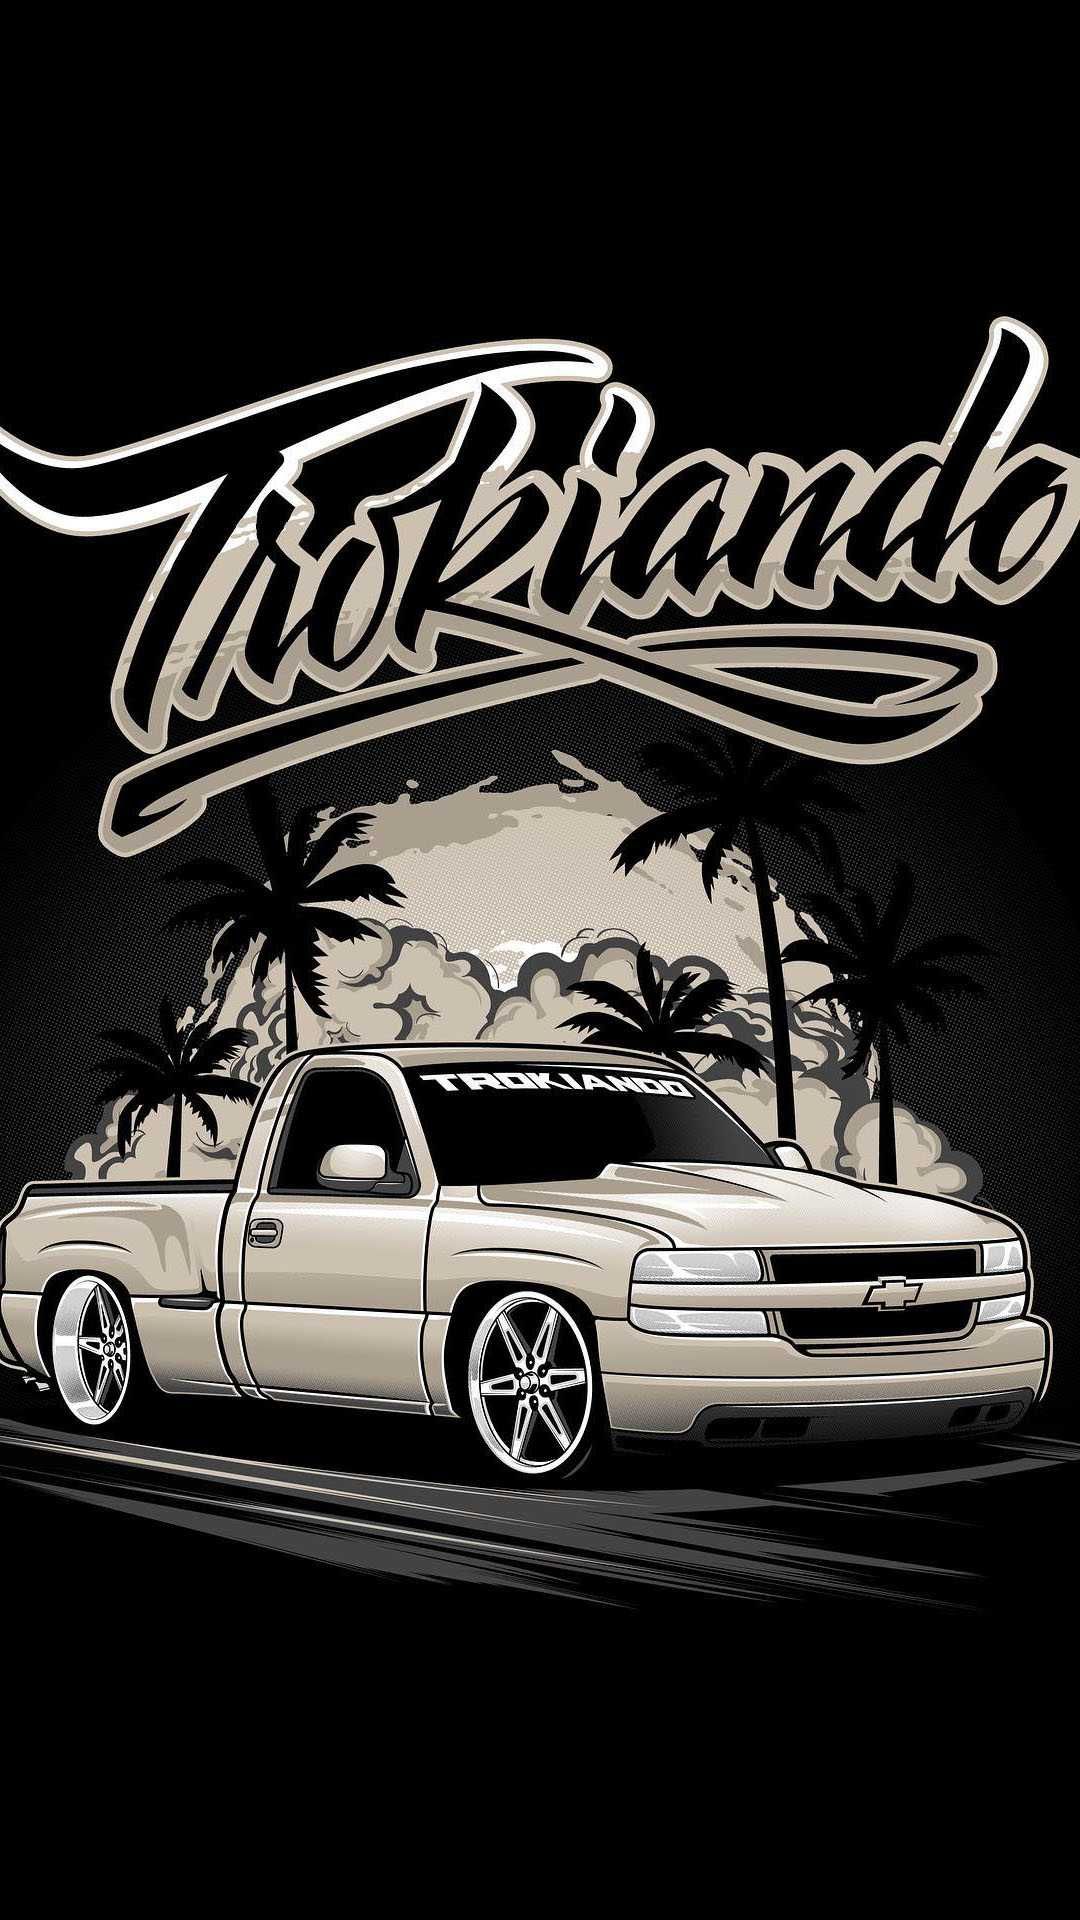 Dropped Trucks Wallpapers